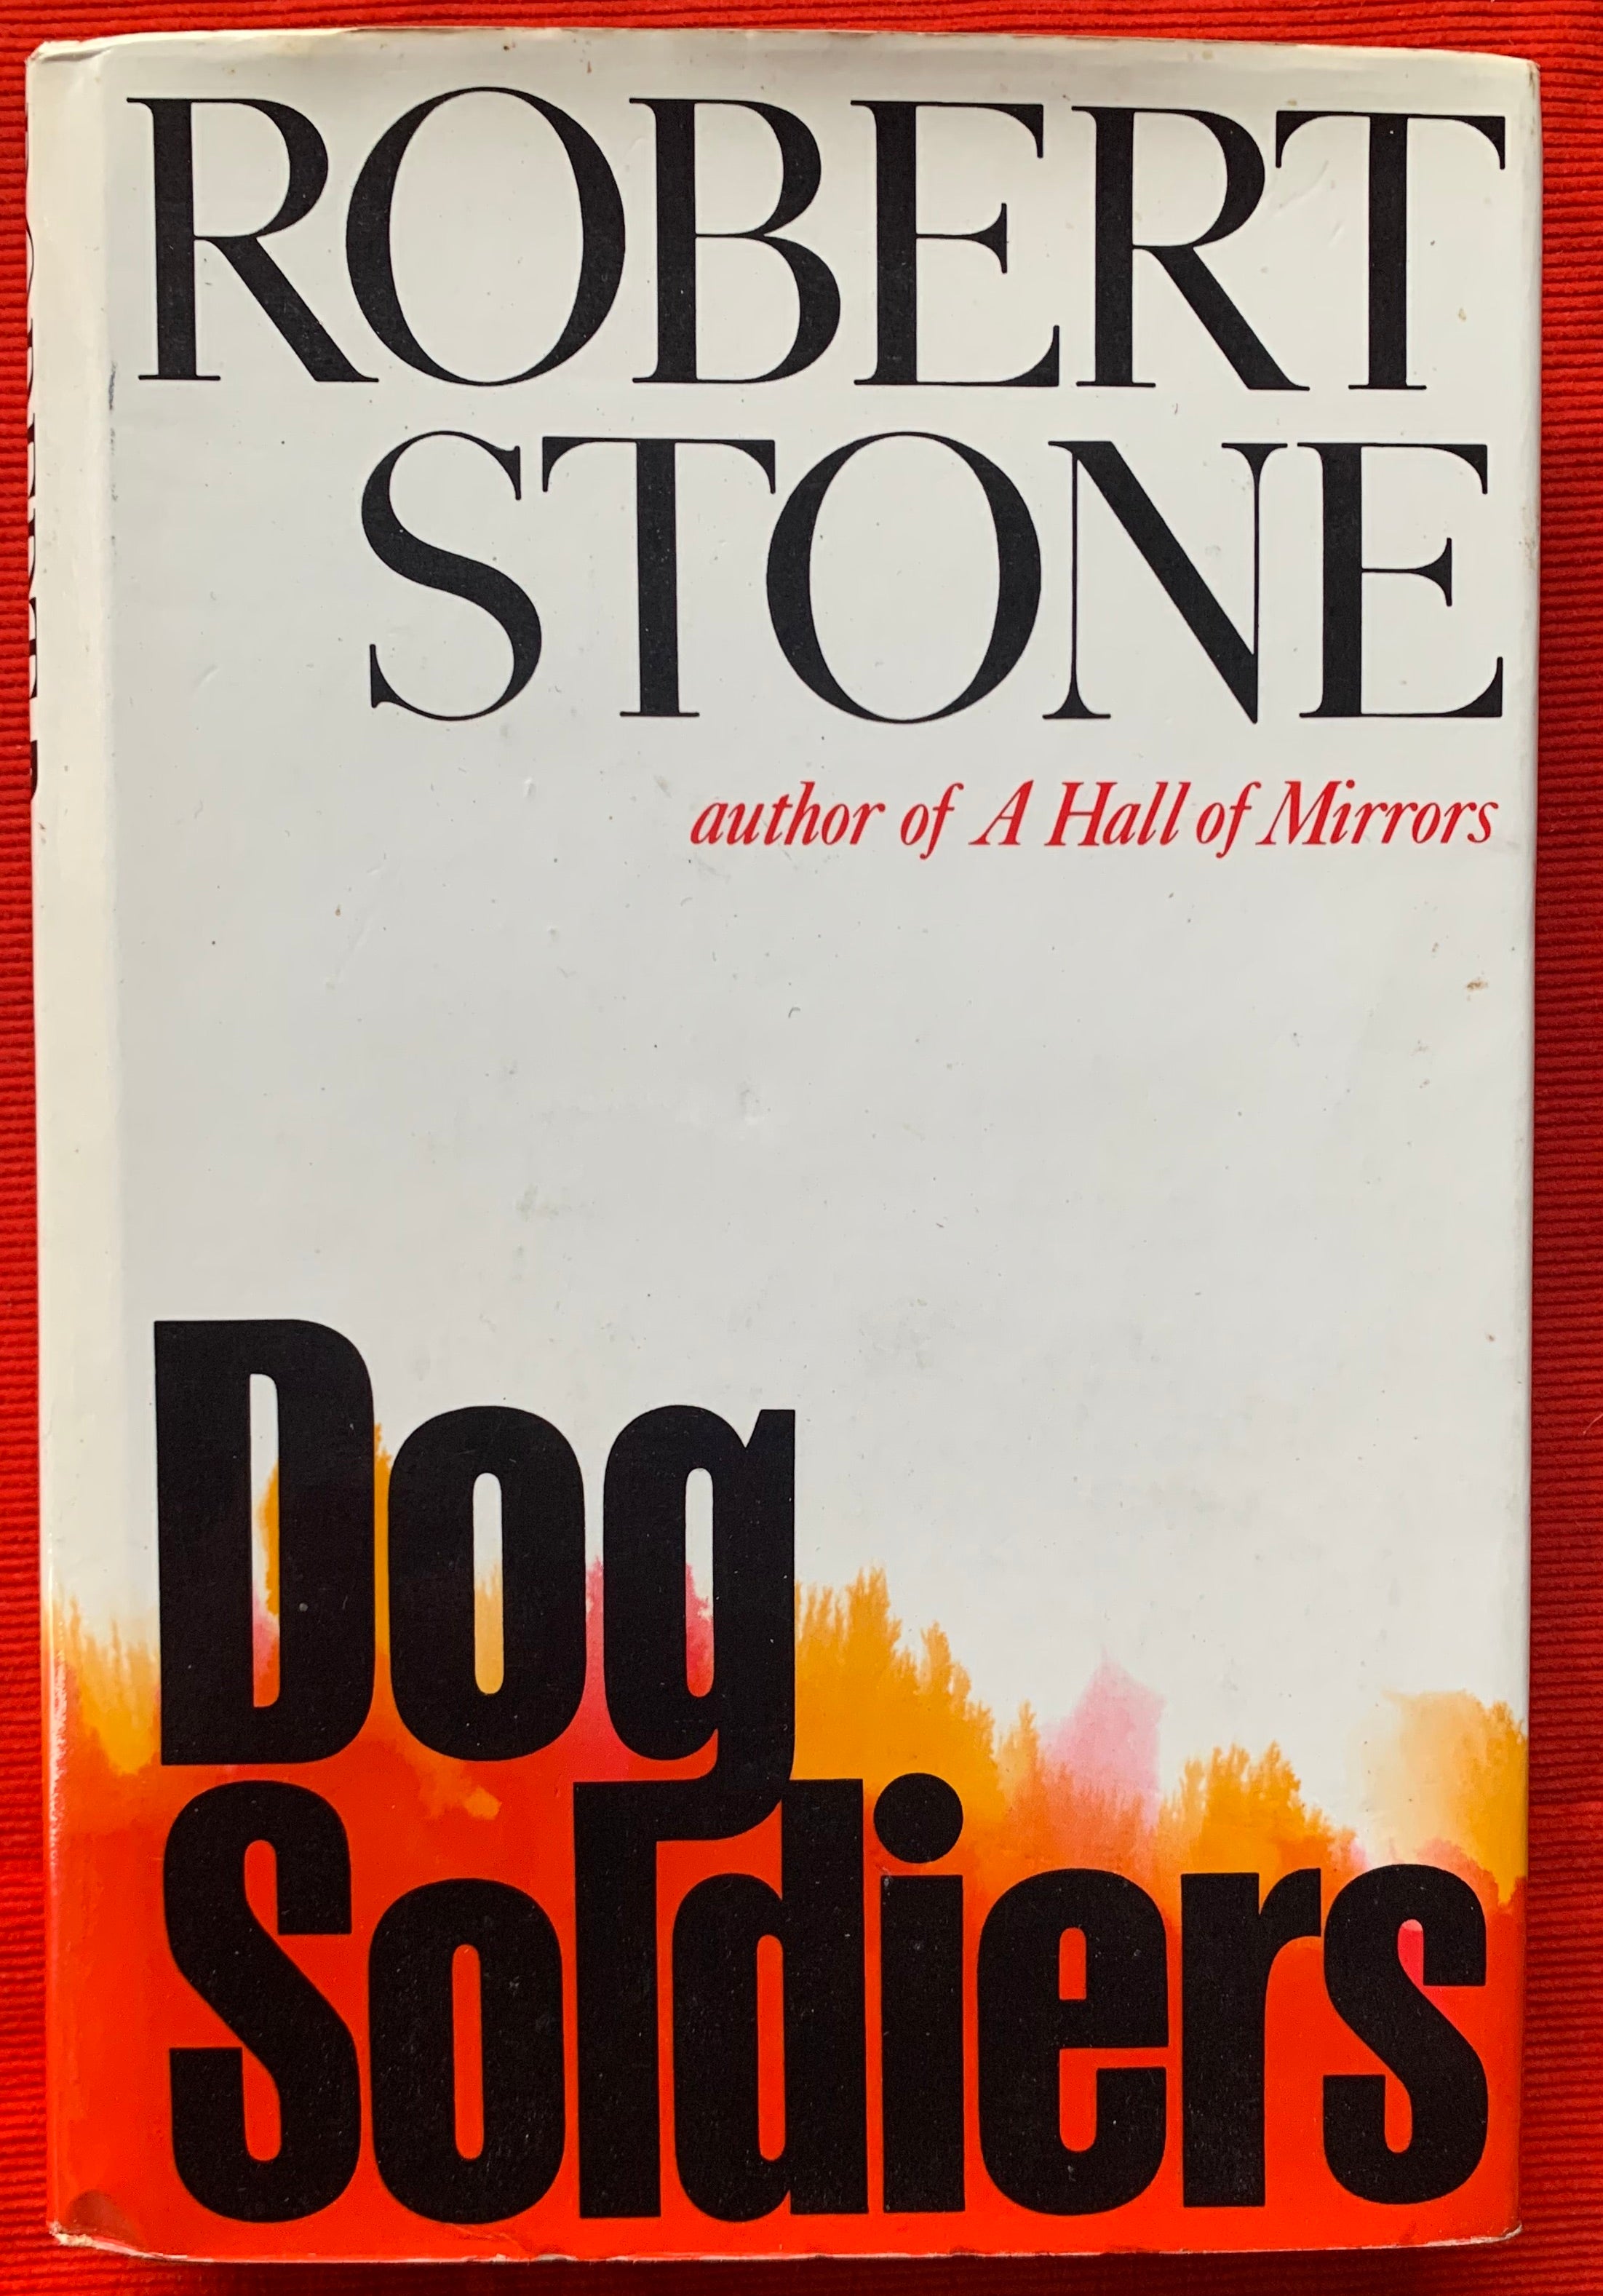 "Dog Soldiers" By Robert Stone